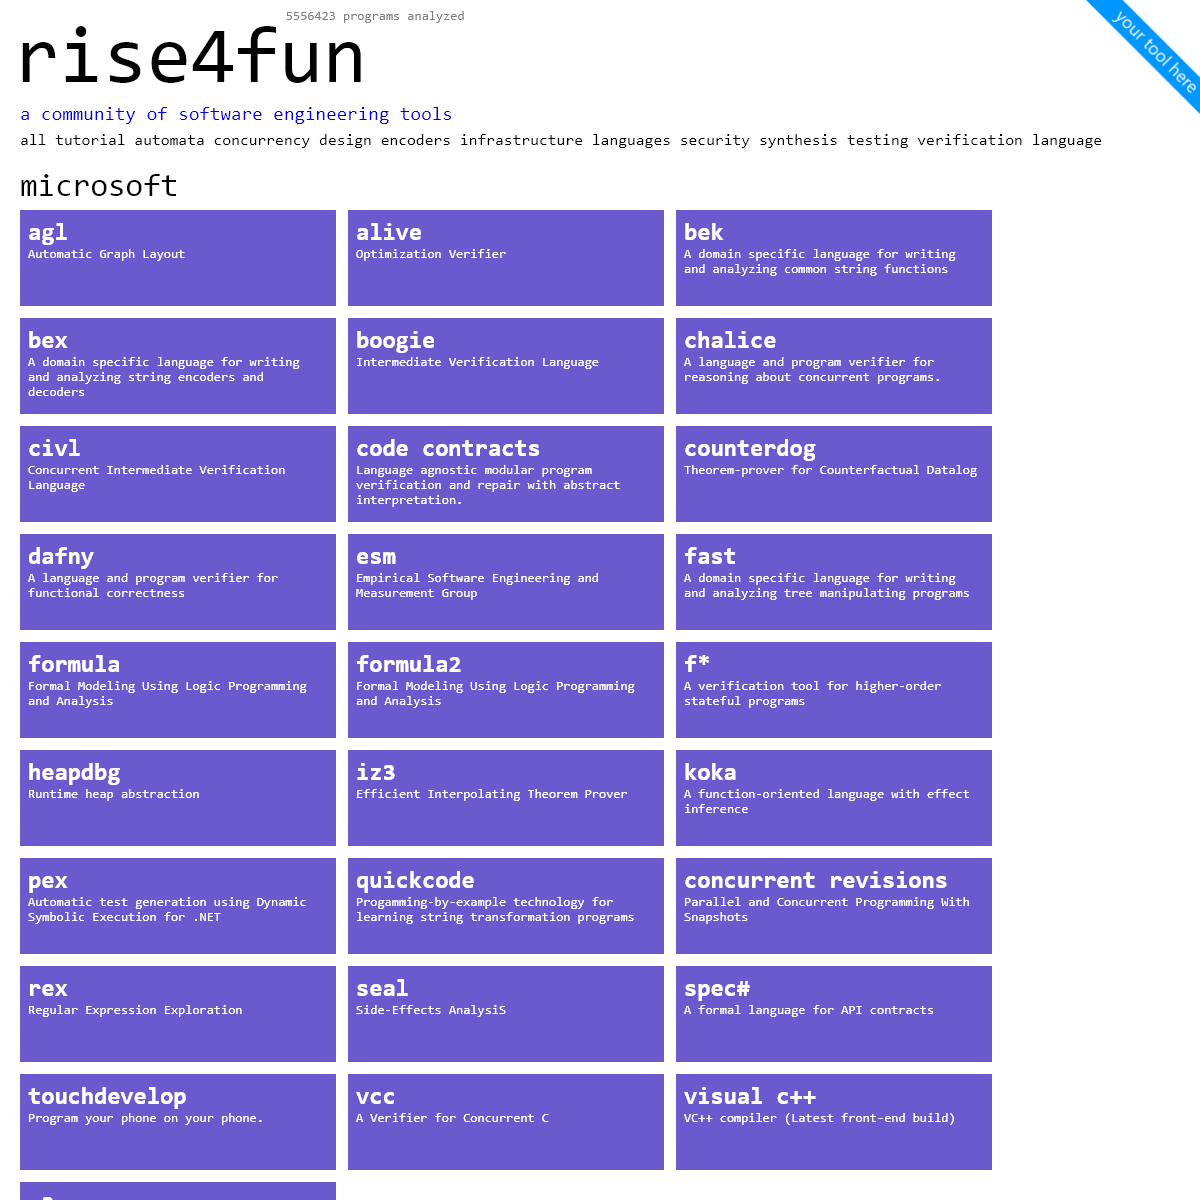 A complete backup of rise4fun.com